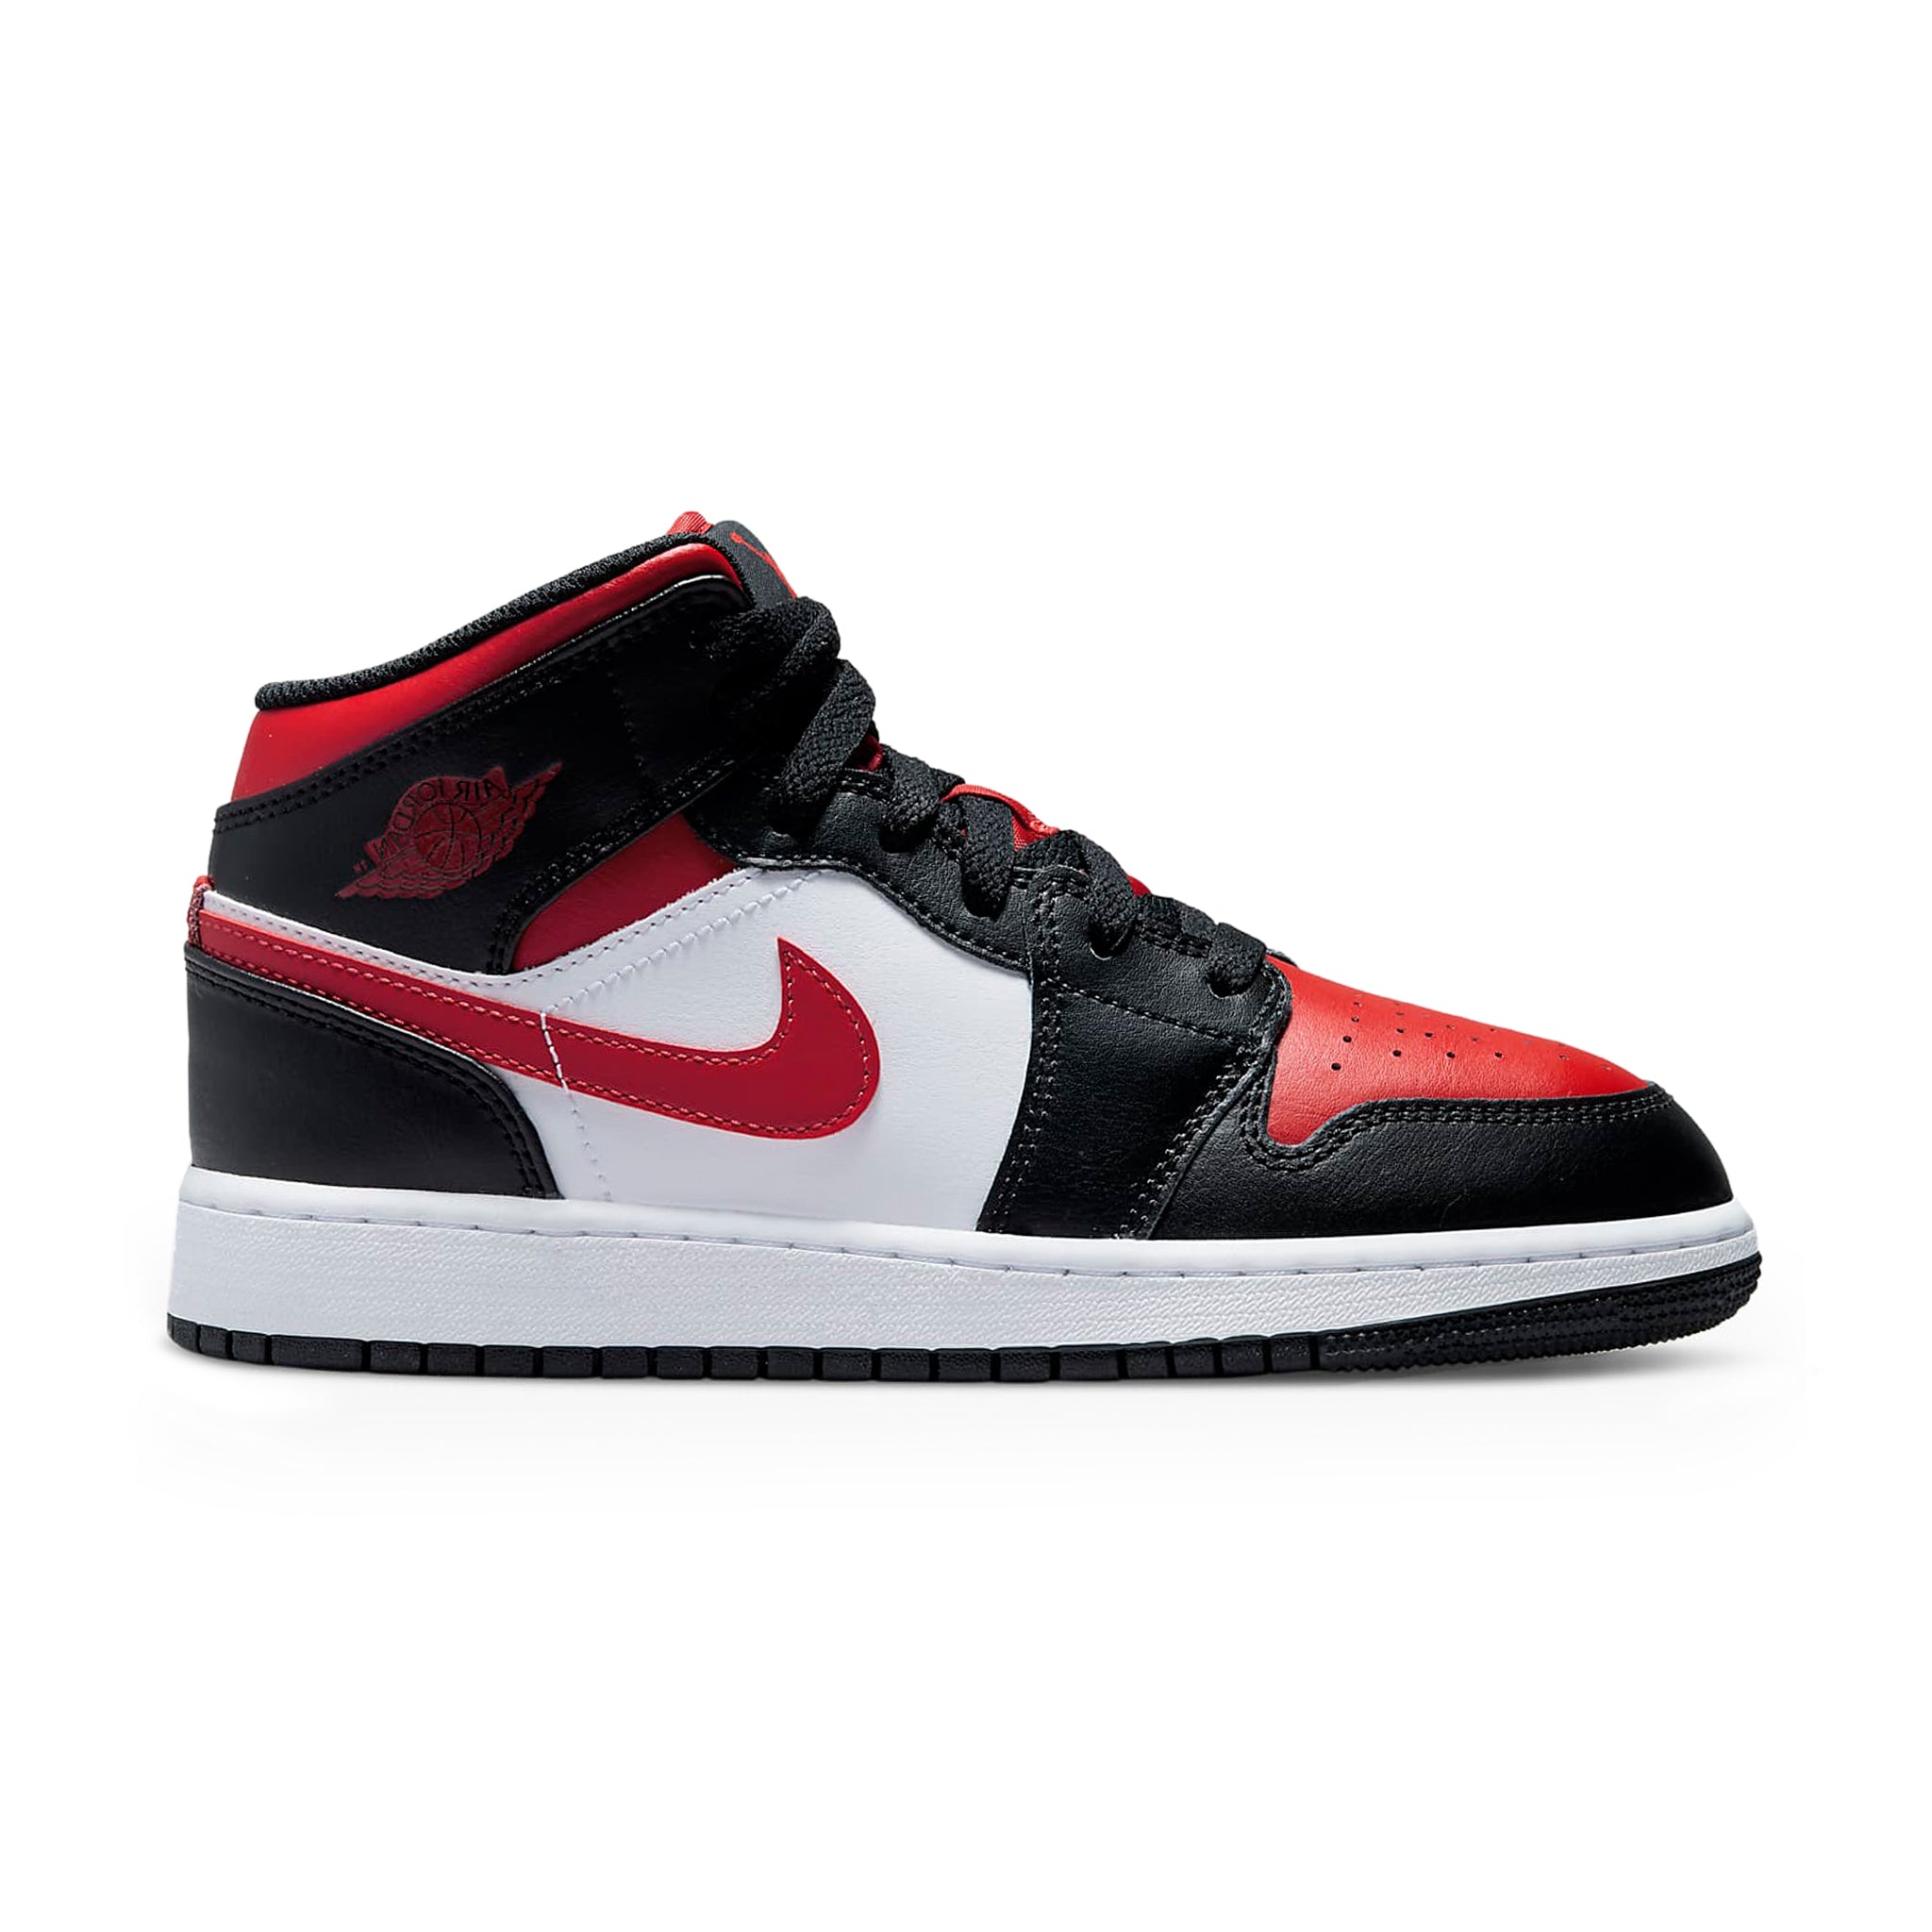 Front view of Air Jordan 1 Mid Black Fire Red (GS) 554725-079